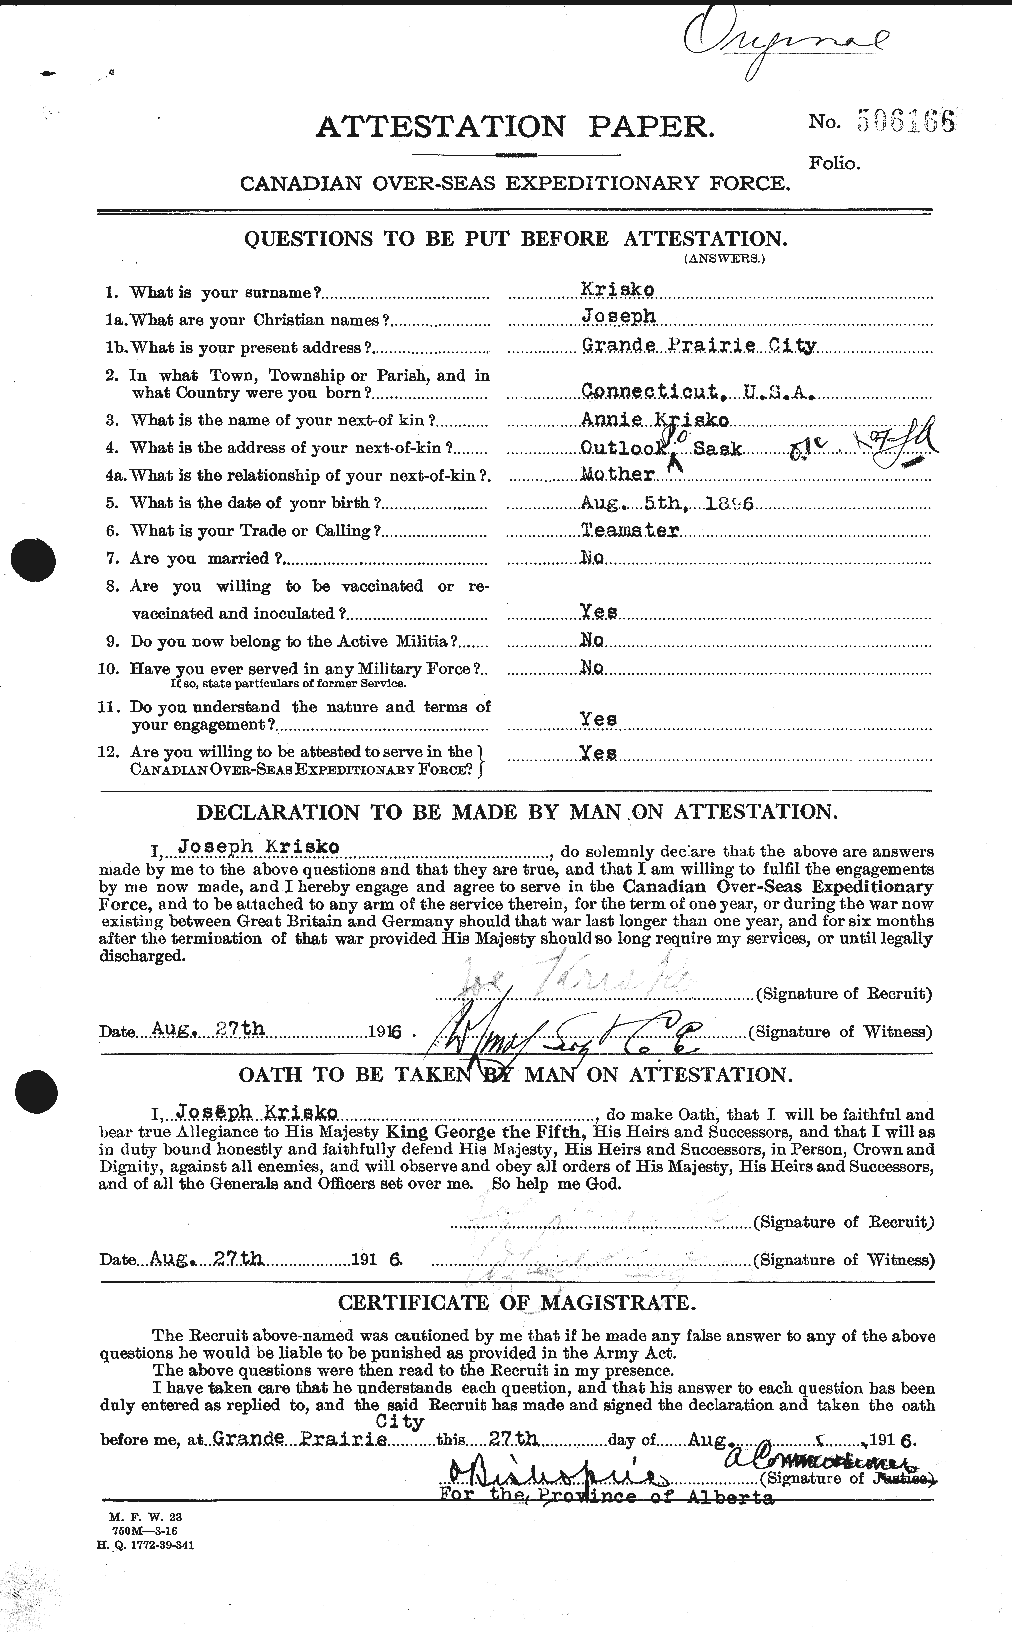 Personnel Records of the First World War - CEF 439153a